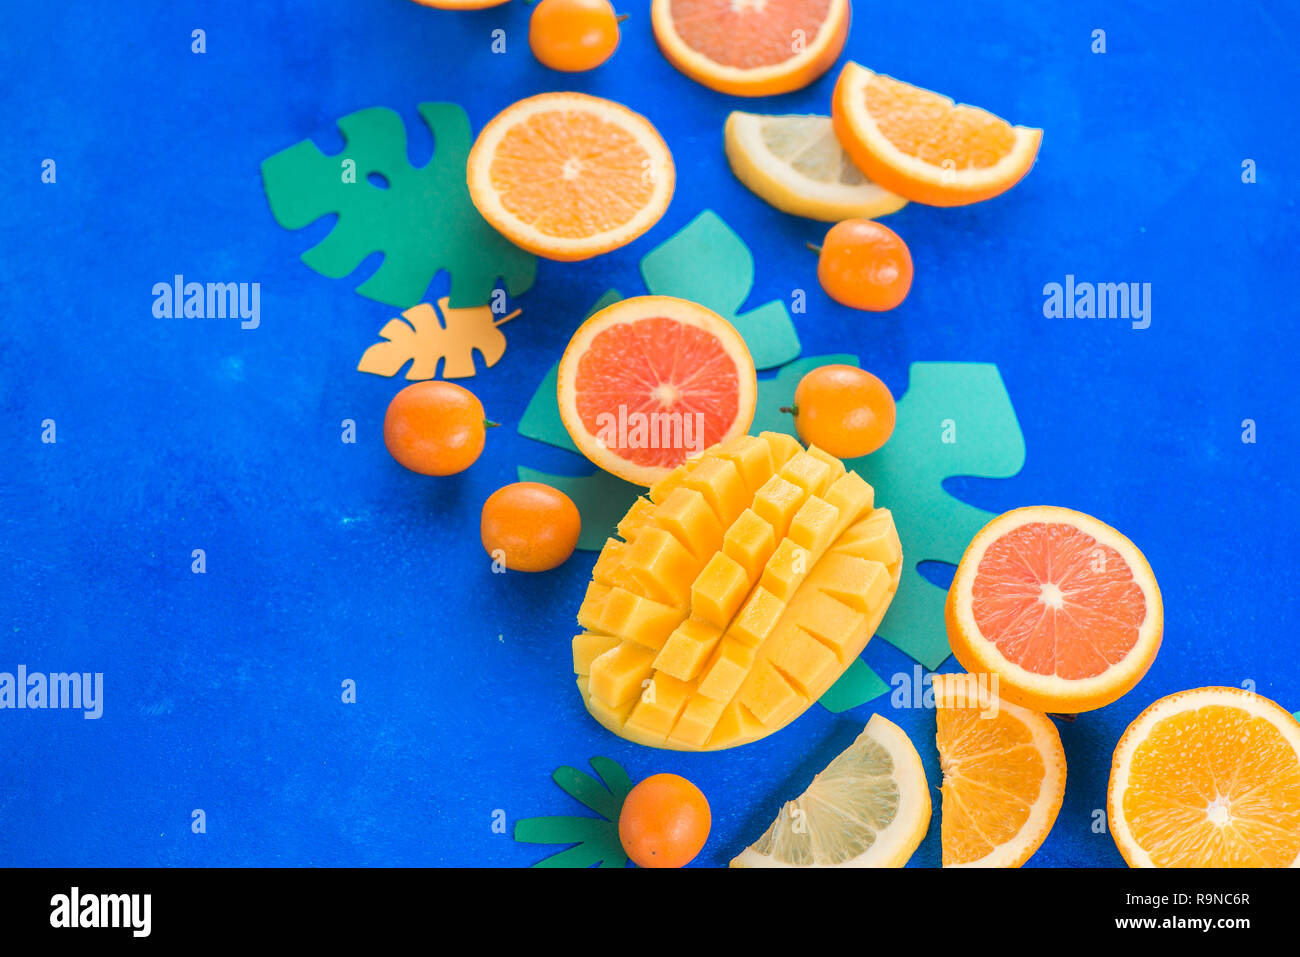 Exotic fruits close-up. Mango, oranges, kumquat and other tropical fruits vibrant blue background with copy space. Stock Photo